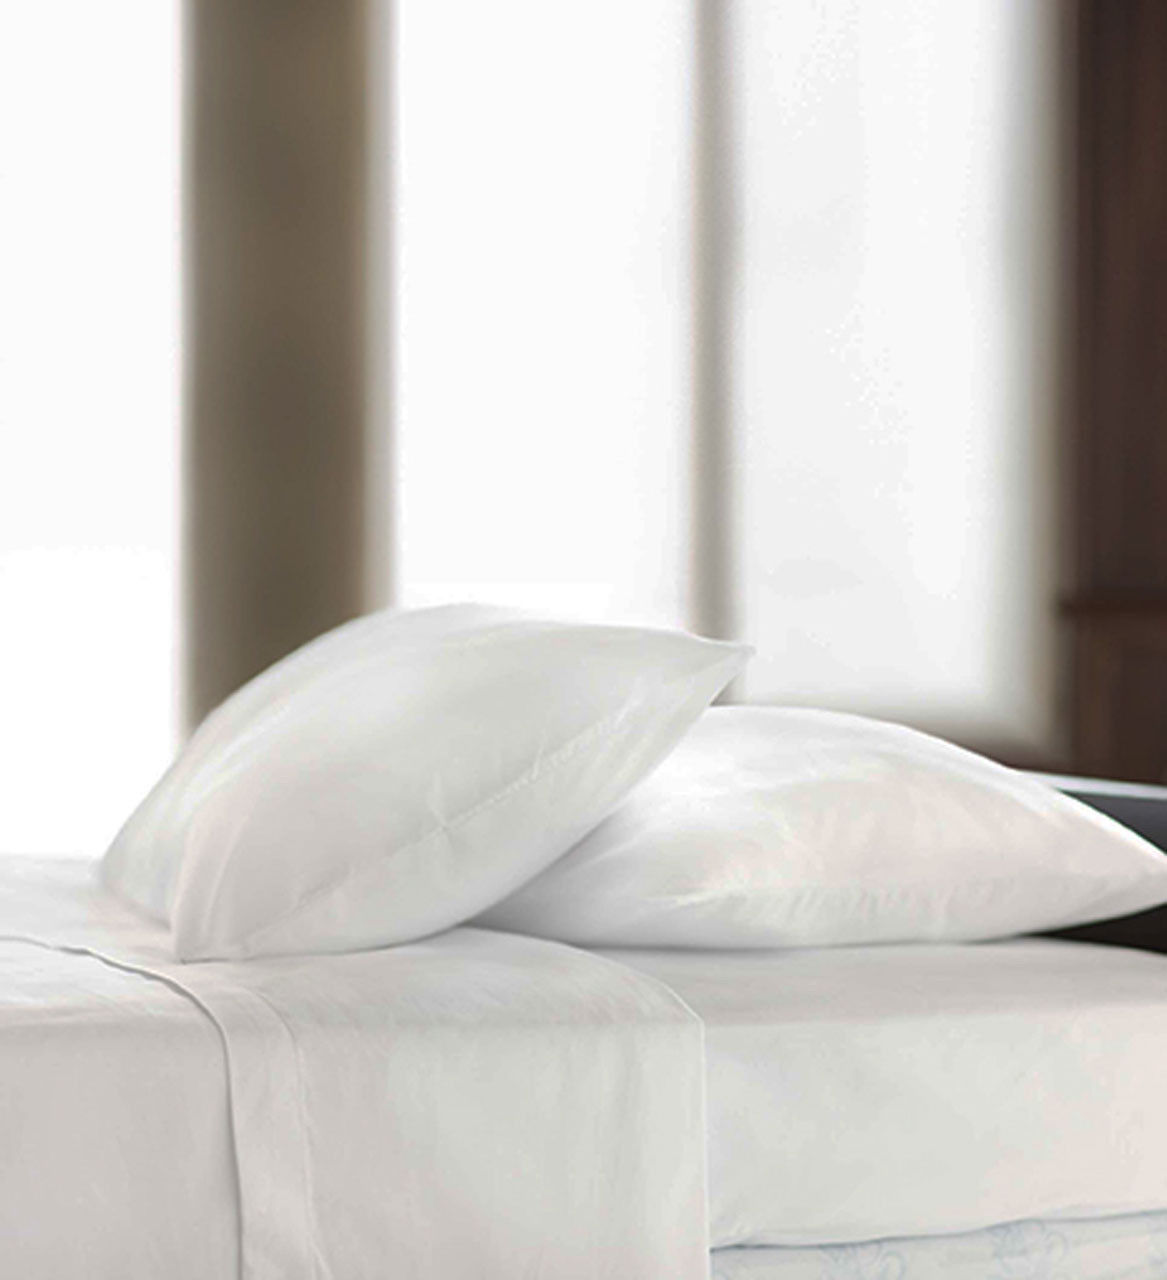 For how long has the Standard Textile Centium Satin Sheets, 65/35 been available to hotels?